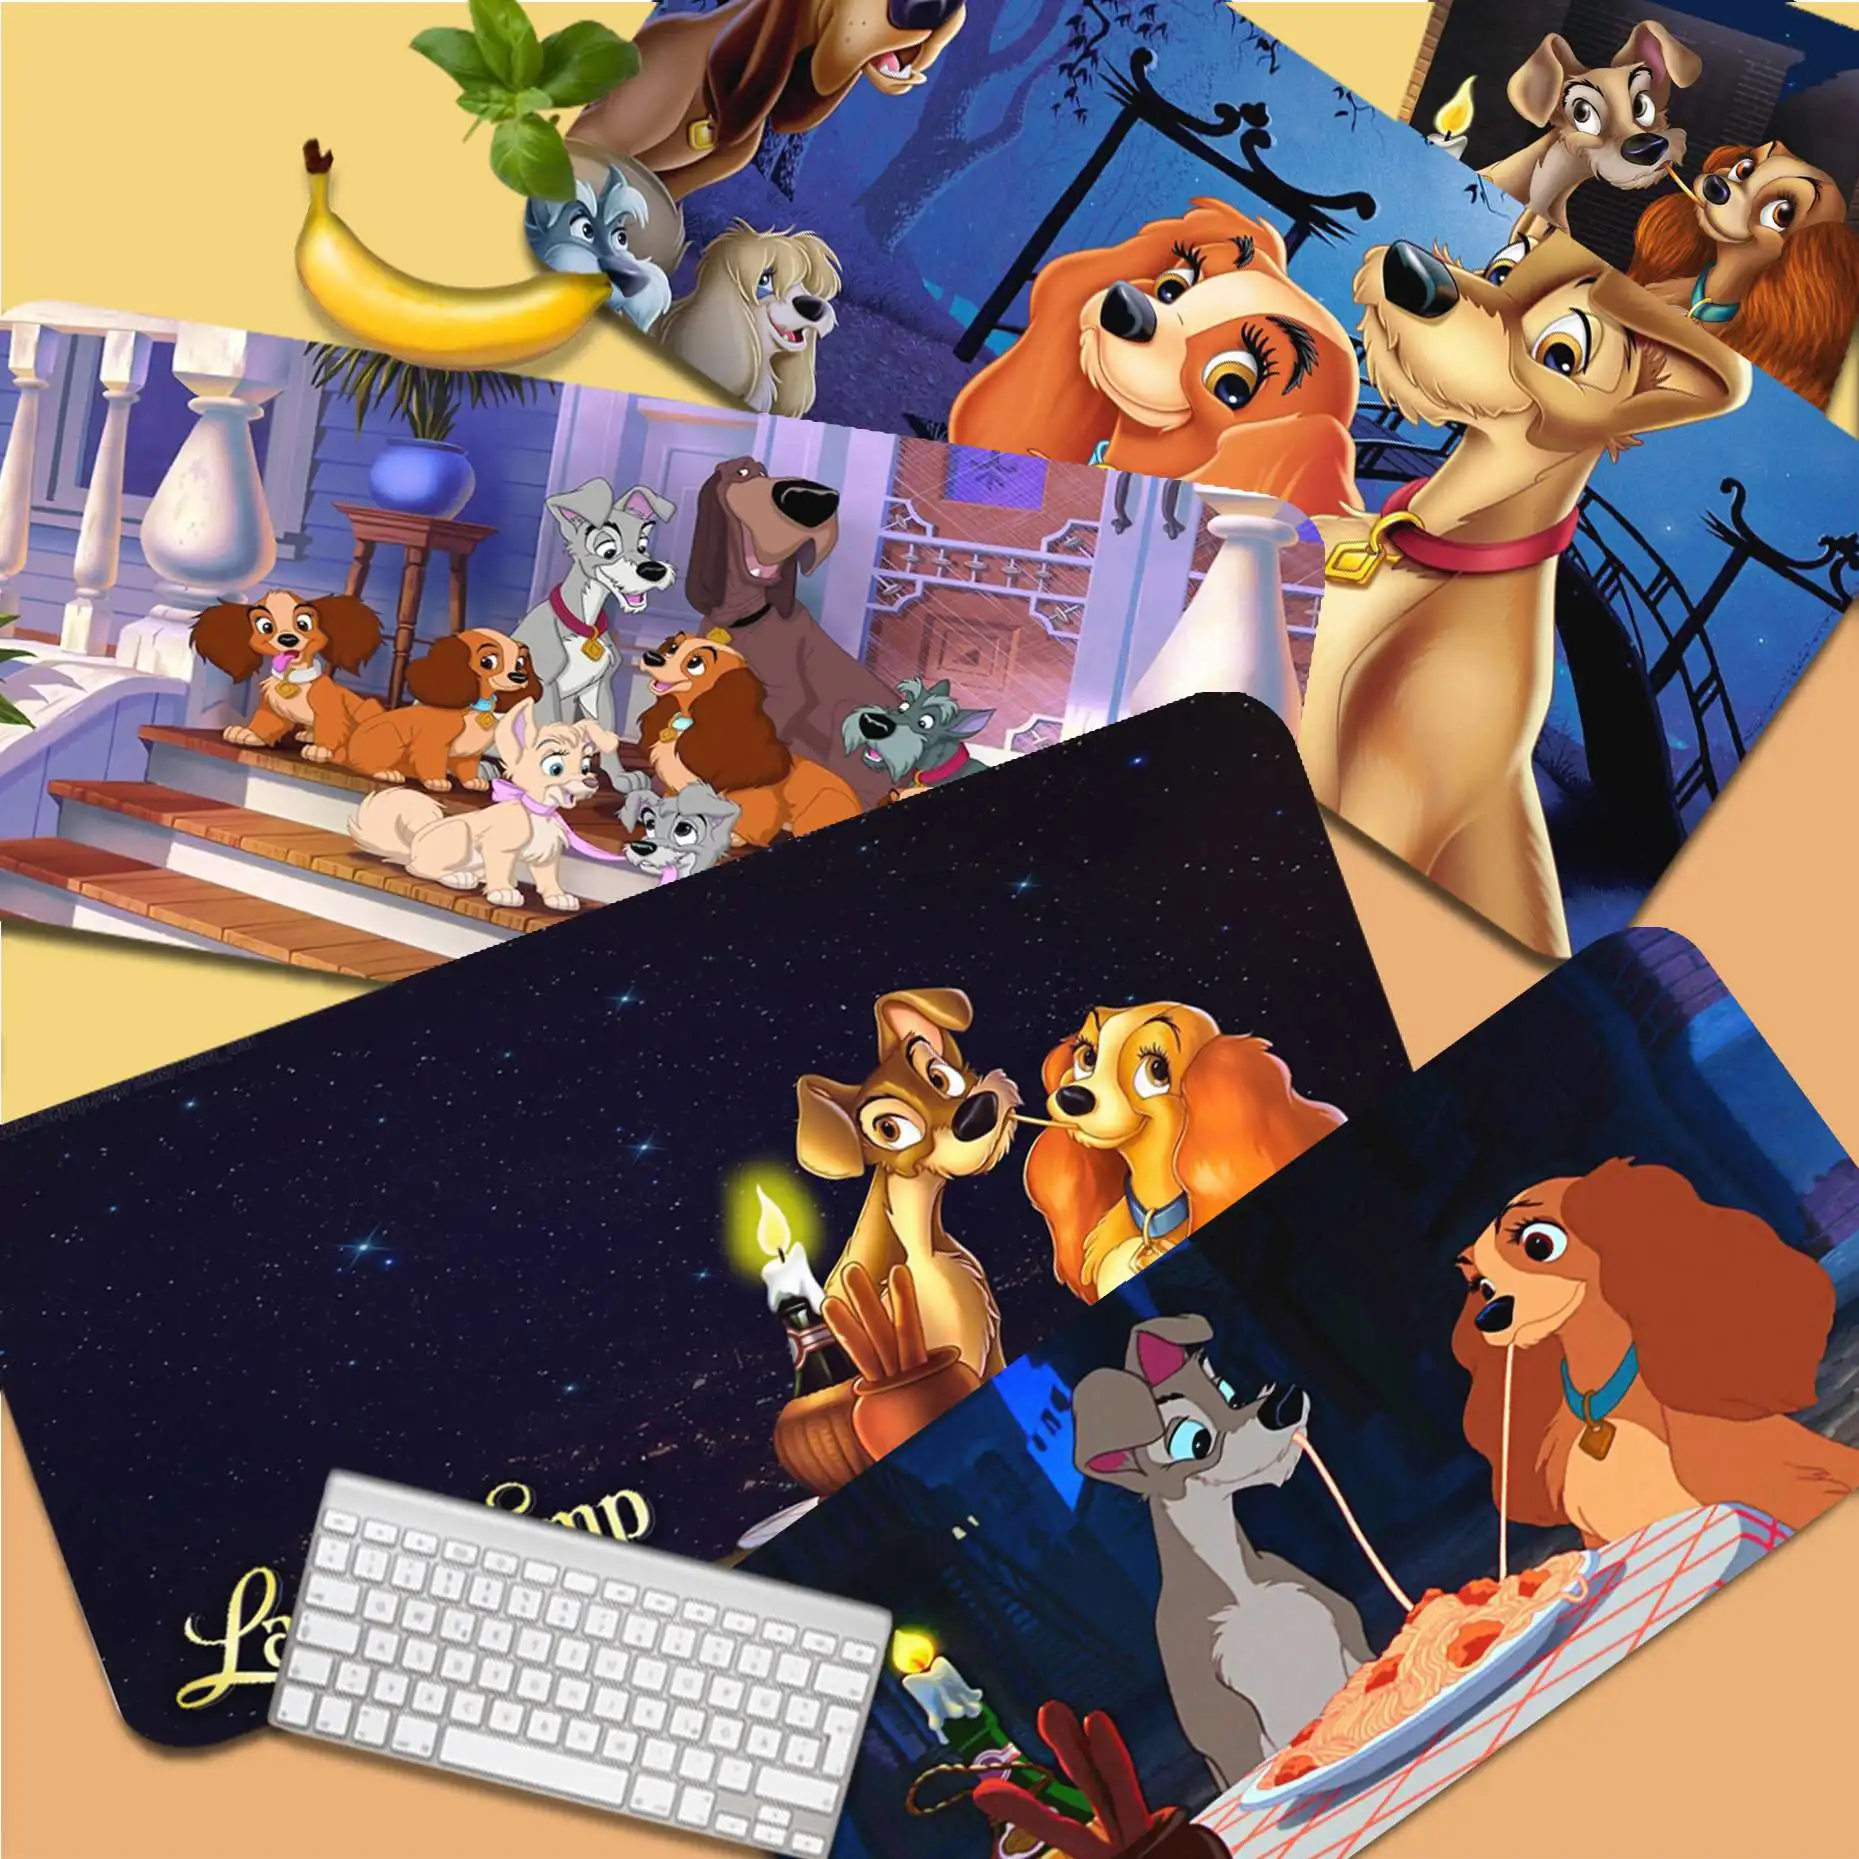 

Disney Lady and the Tramp New Arrivals Laptop Gaming Mice Mousepad Size for L XL game Customized mouse pad for CS GO PUBG